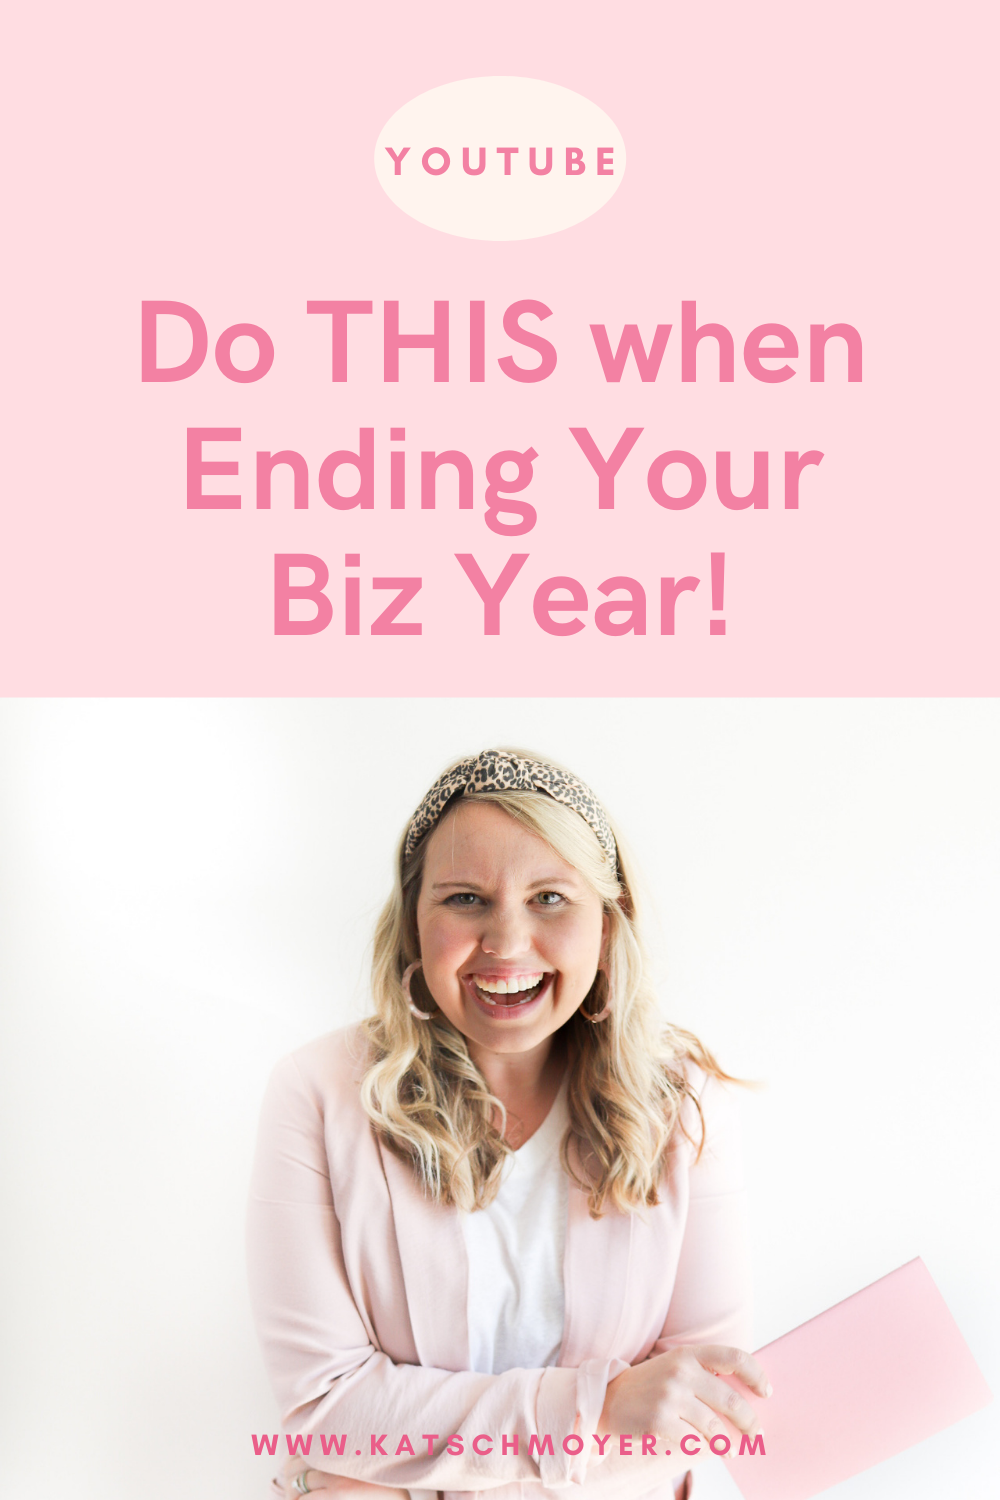 Do THIS when Ending Your Biz Year!